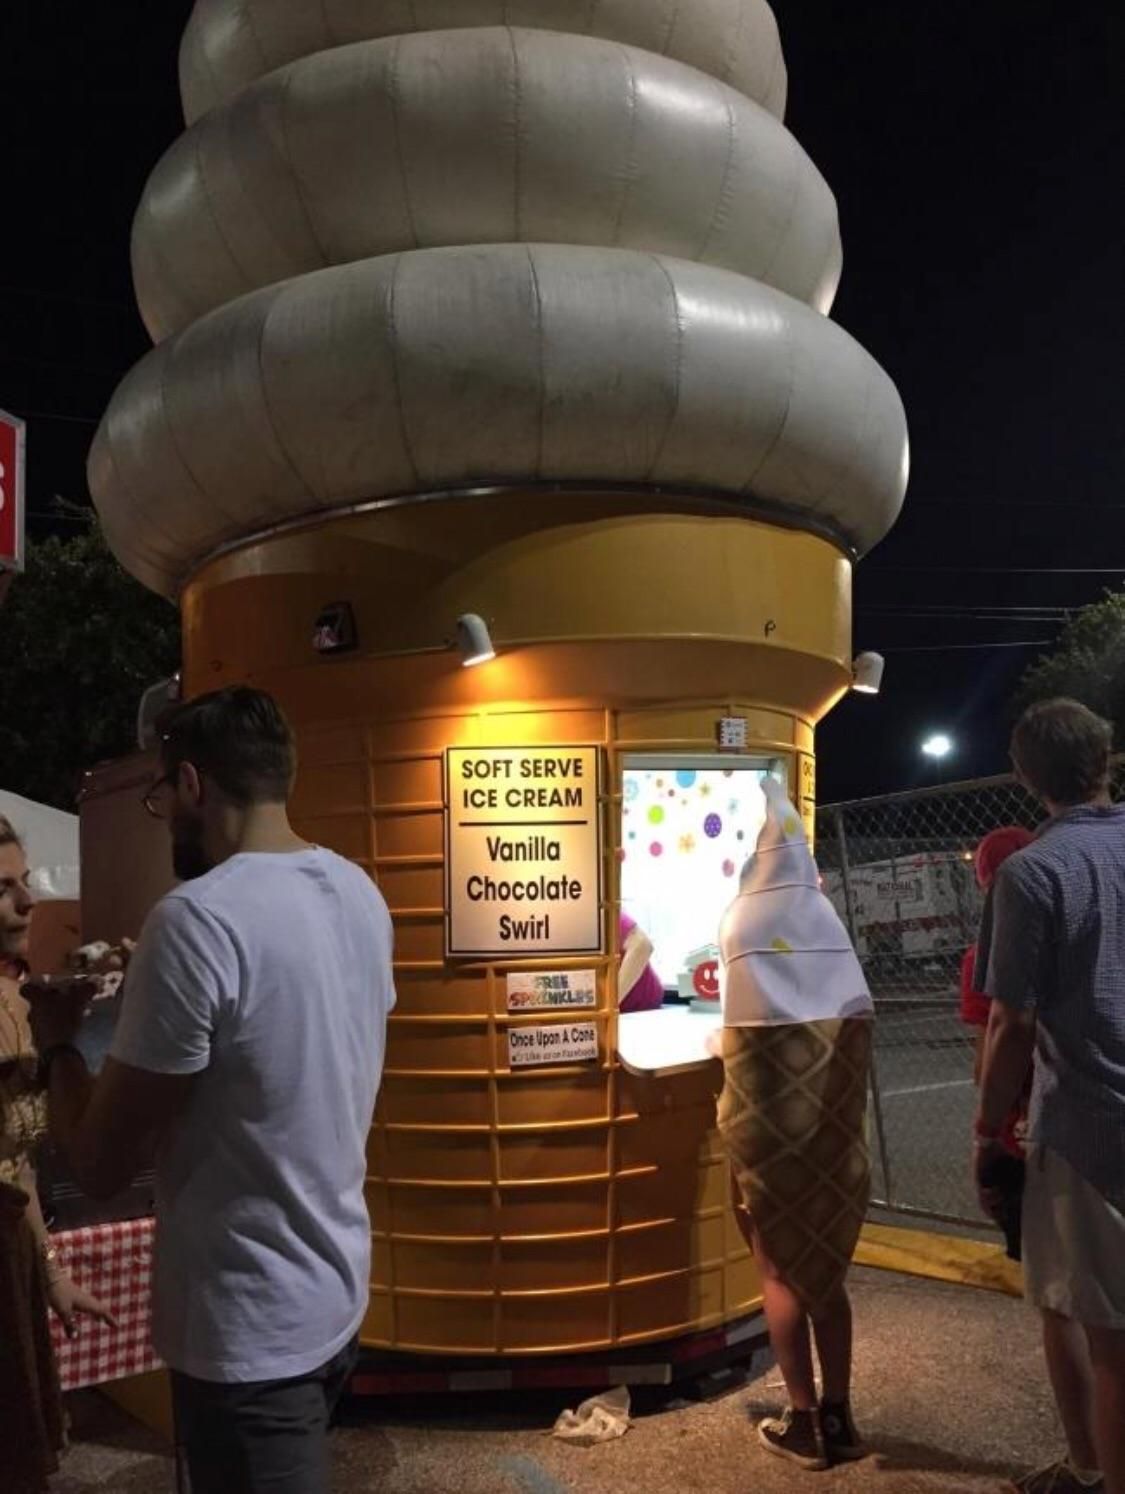 This is an ice cream cone ordering an ice cream cone from an ice cream cone.